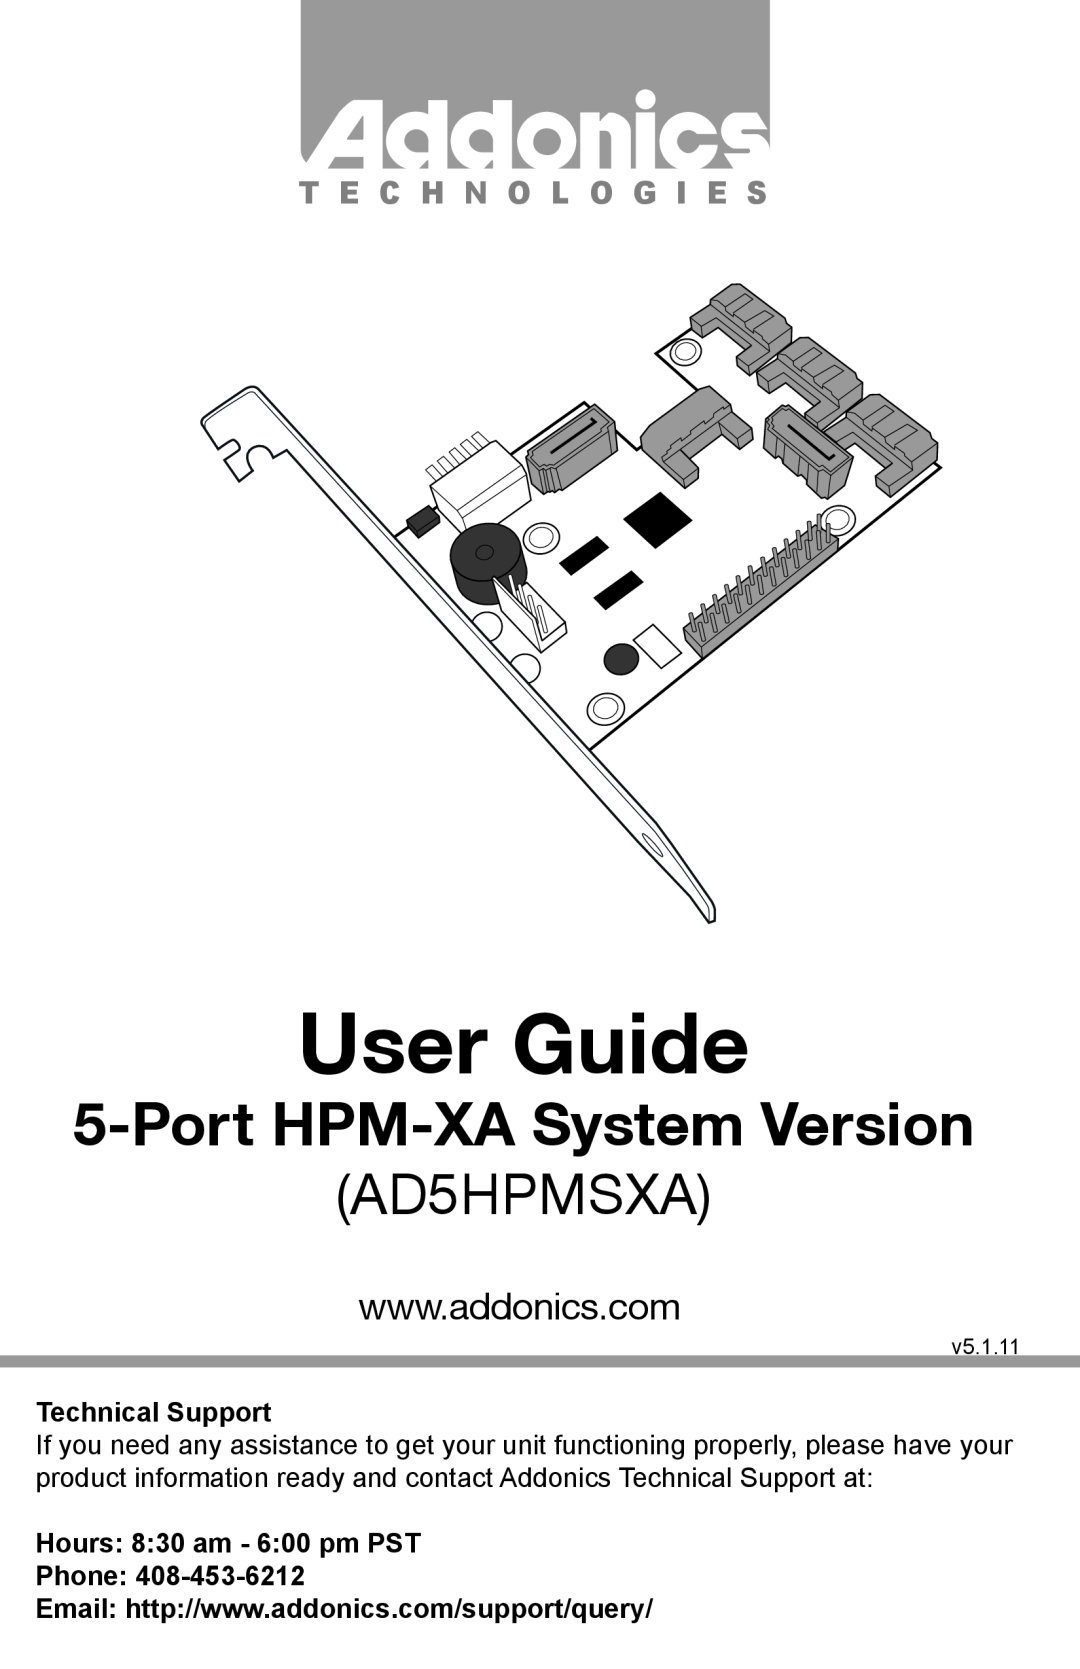 Addonics Technologies AD5HPMSXA manual Technical Support, Hours 830 am - 600 pm PST Phone, User Guide 